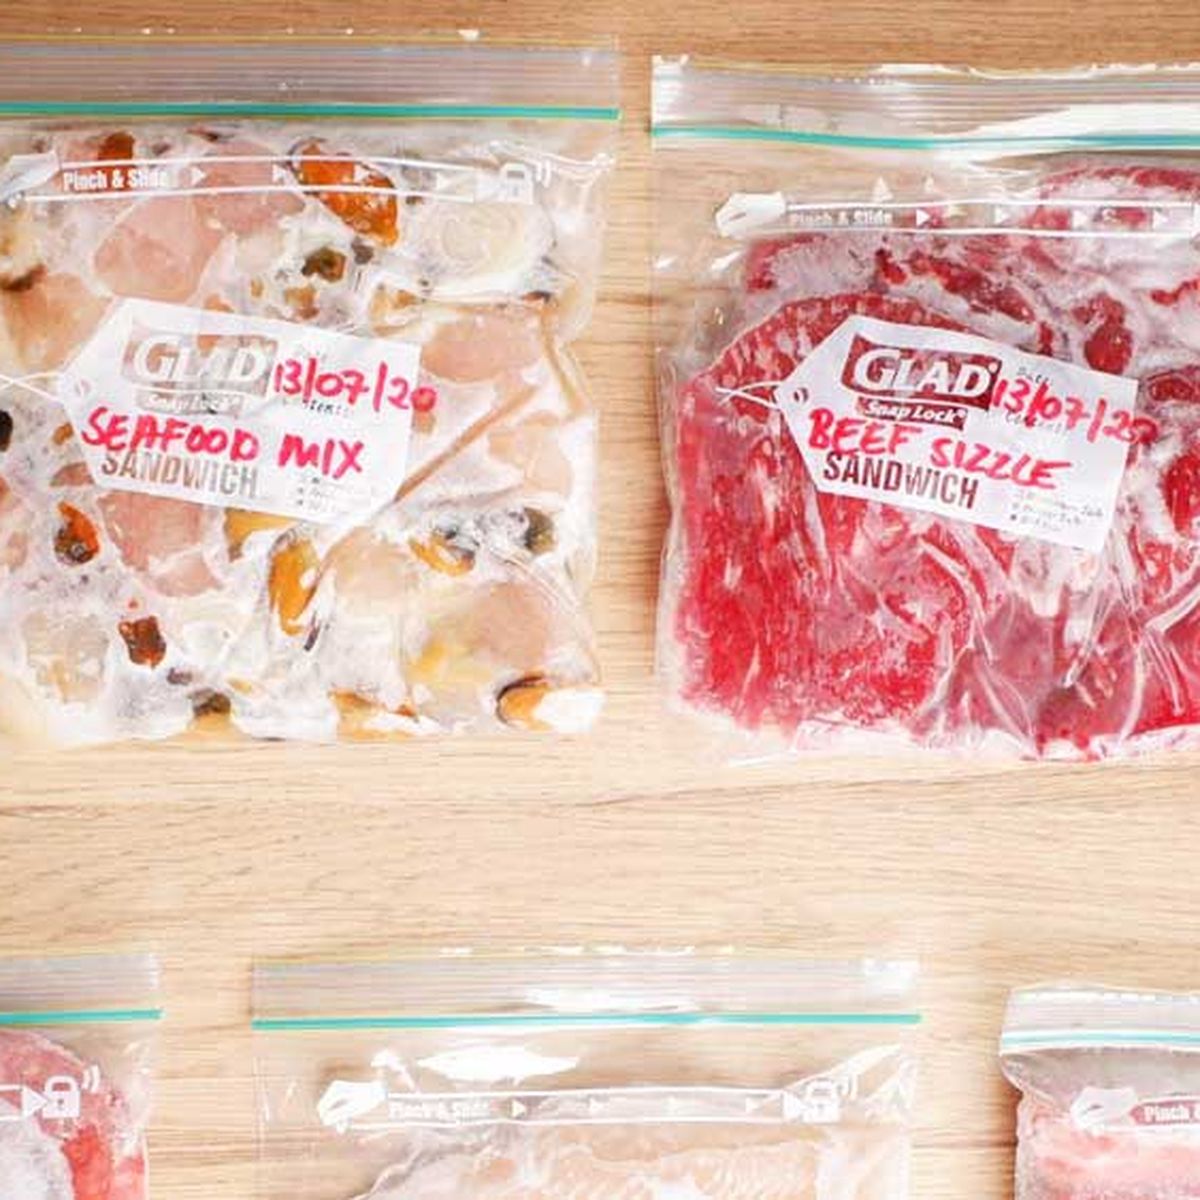 How Long Is It Safe To Store Meat In Your Freezer?